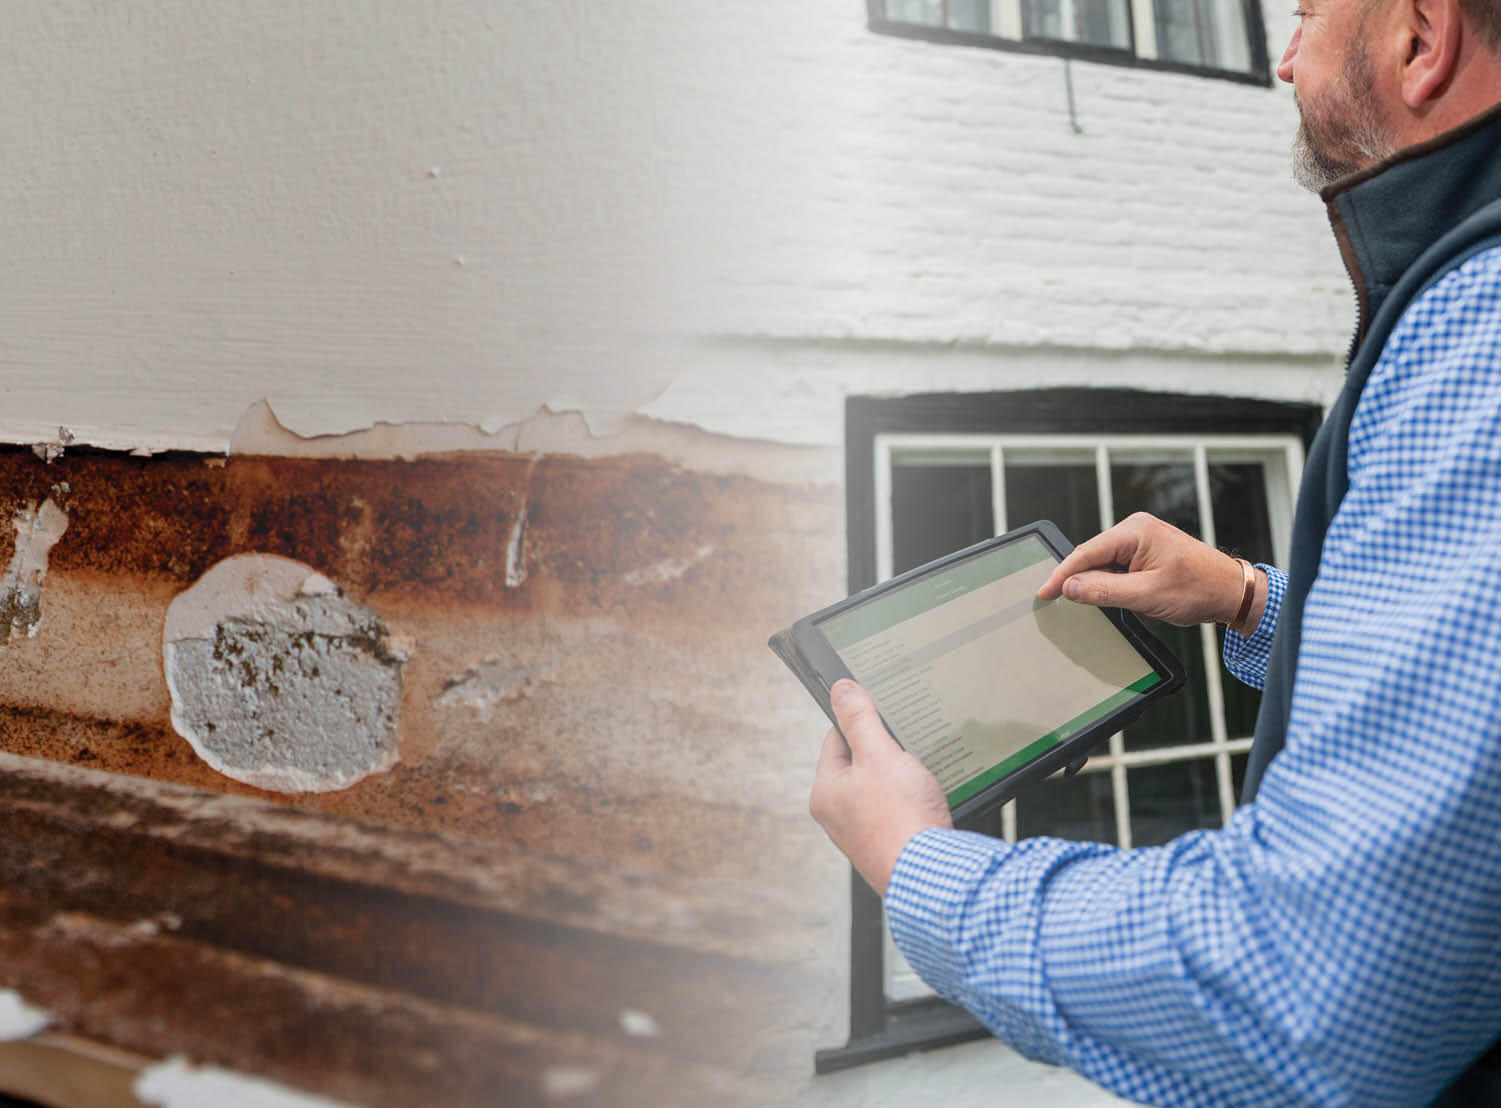 South East Timber & Damp adopt digital solutions to improve their workflow and drive growth